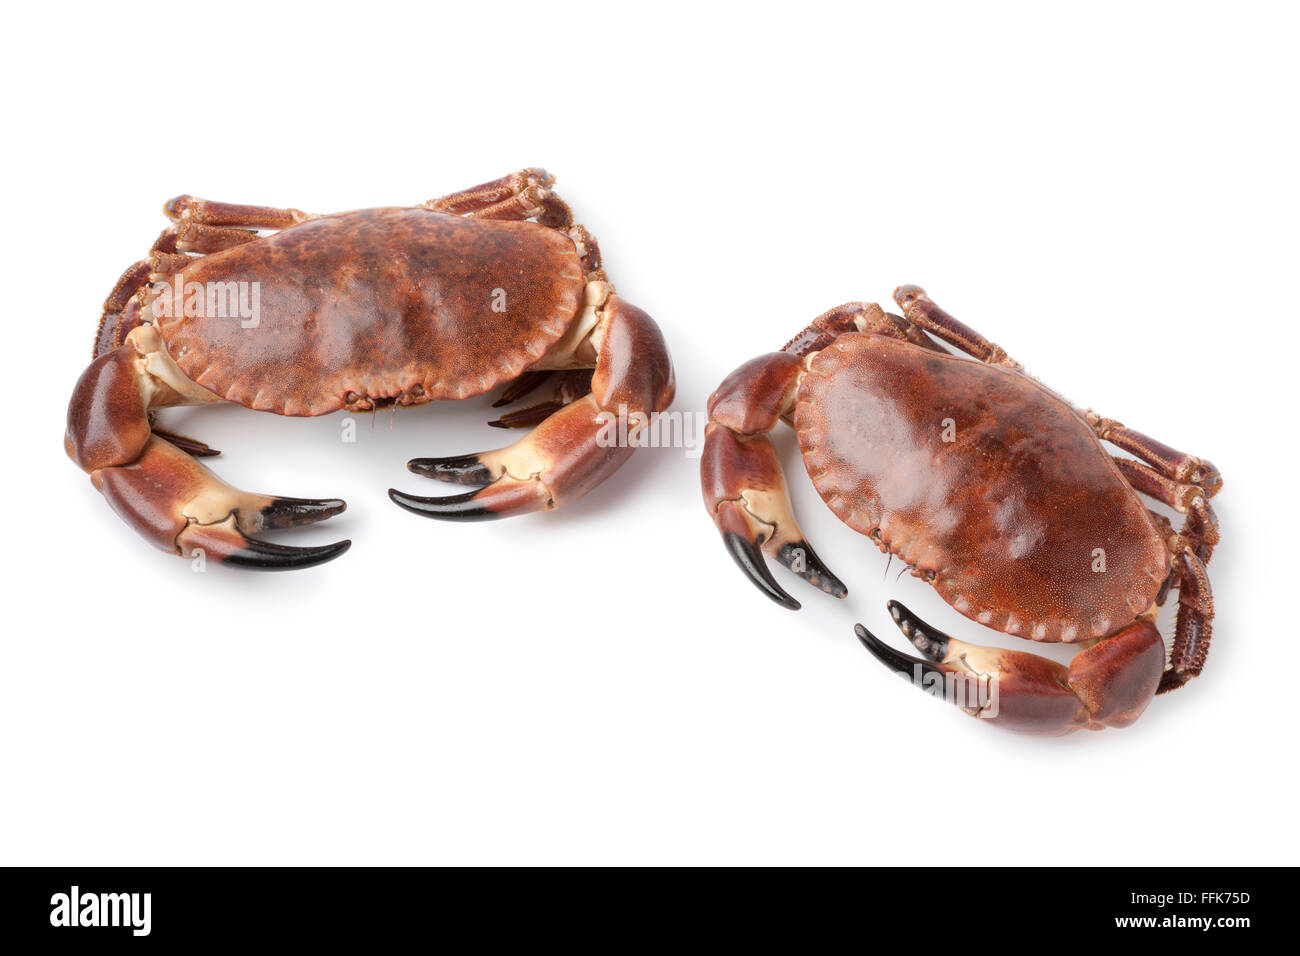 Pair of fresh raw edible sea crabs isolated on white background Stock Photo